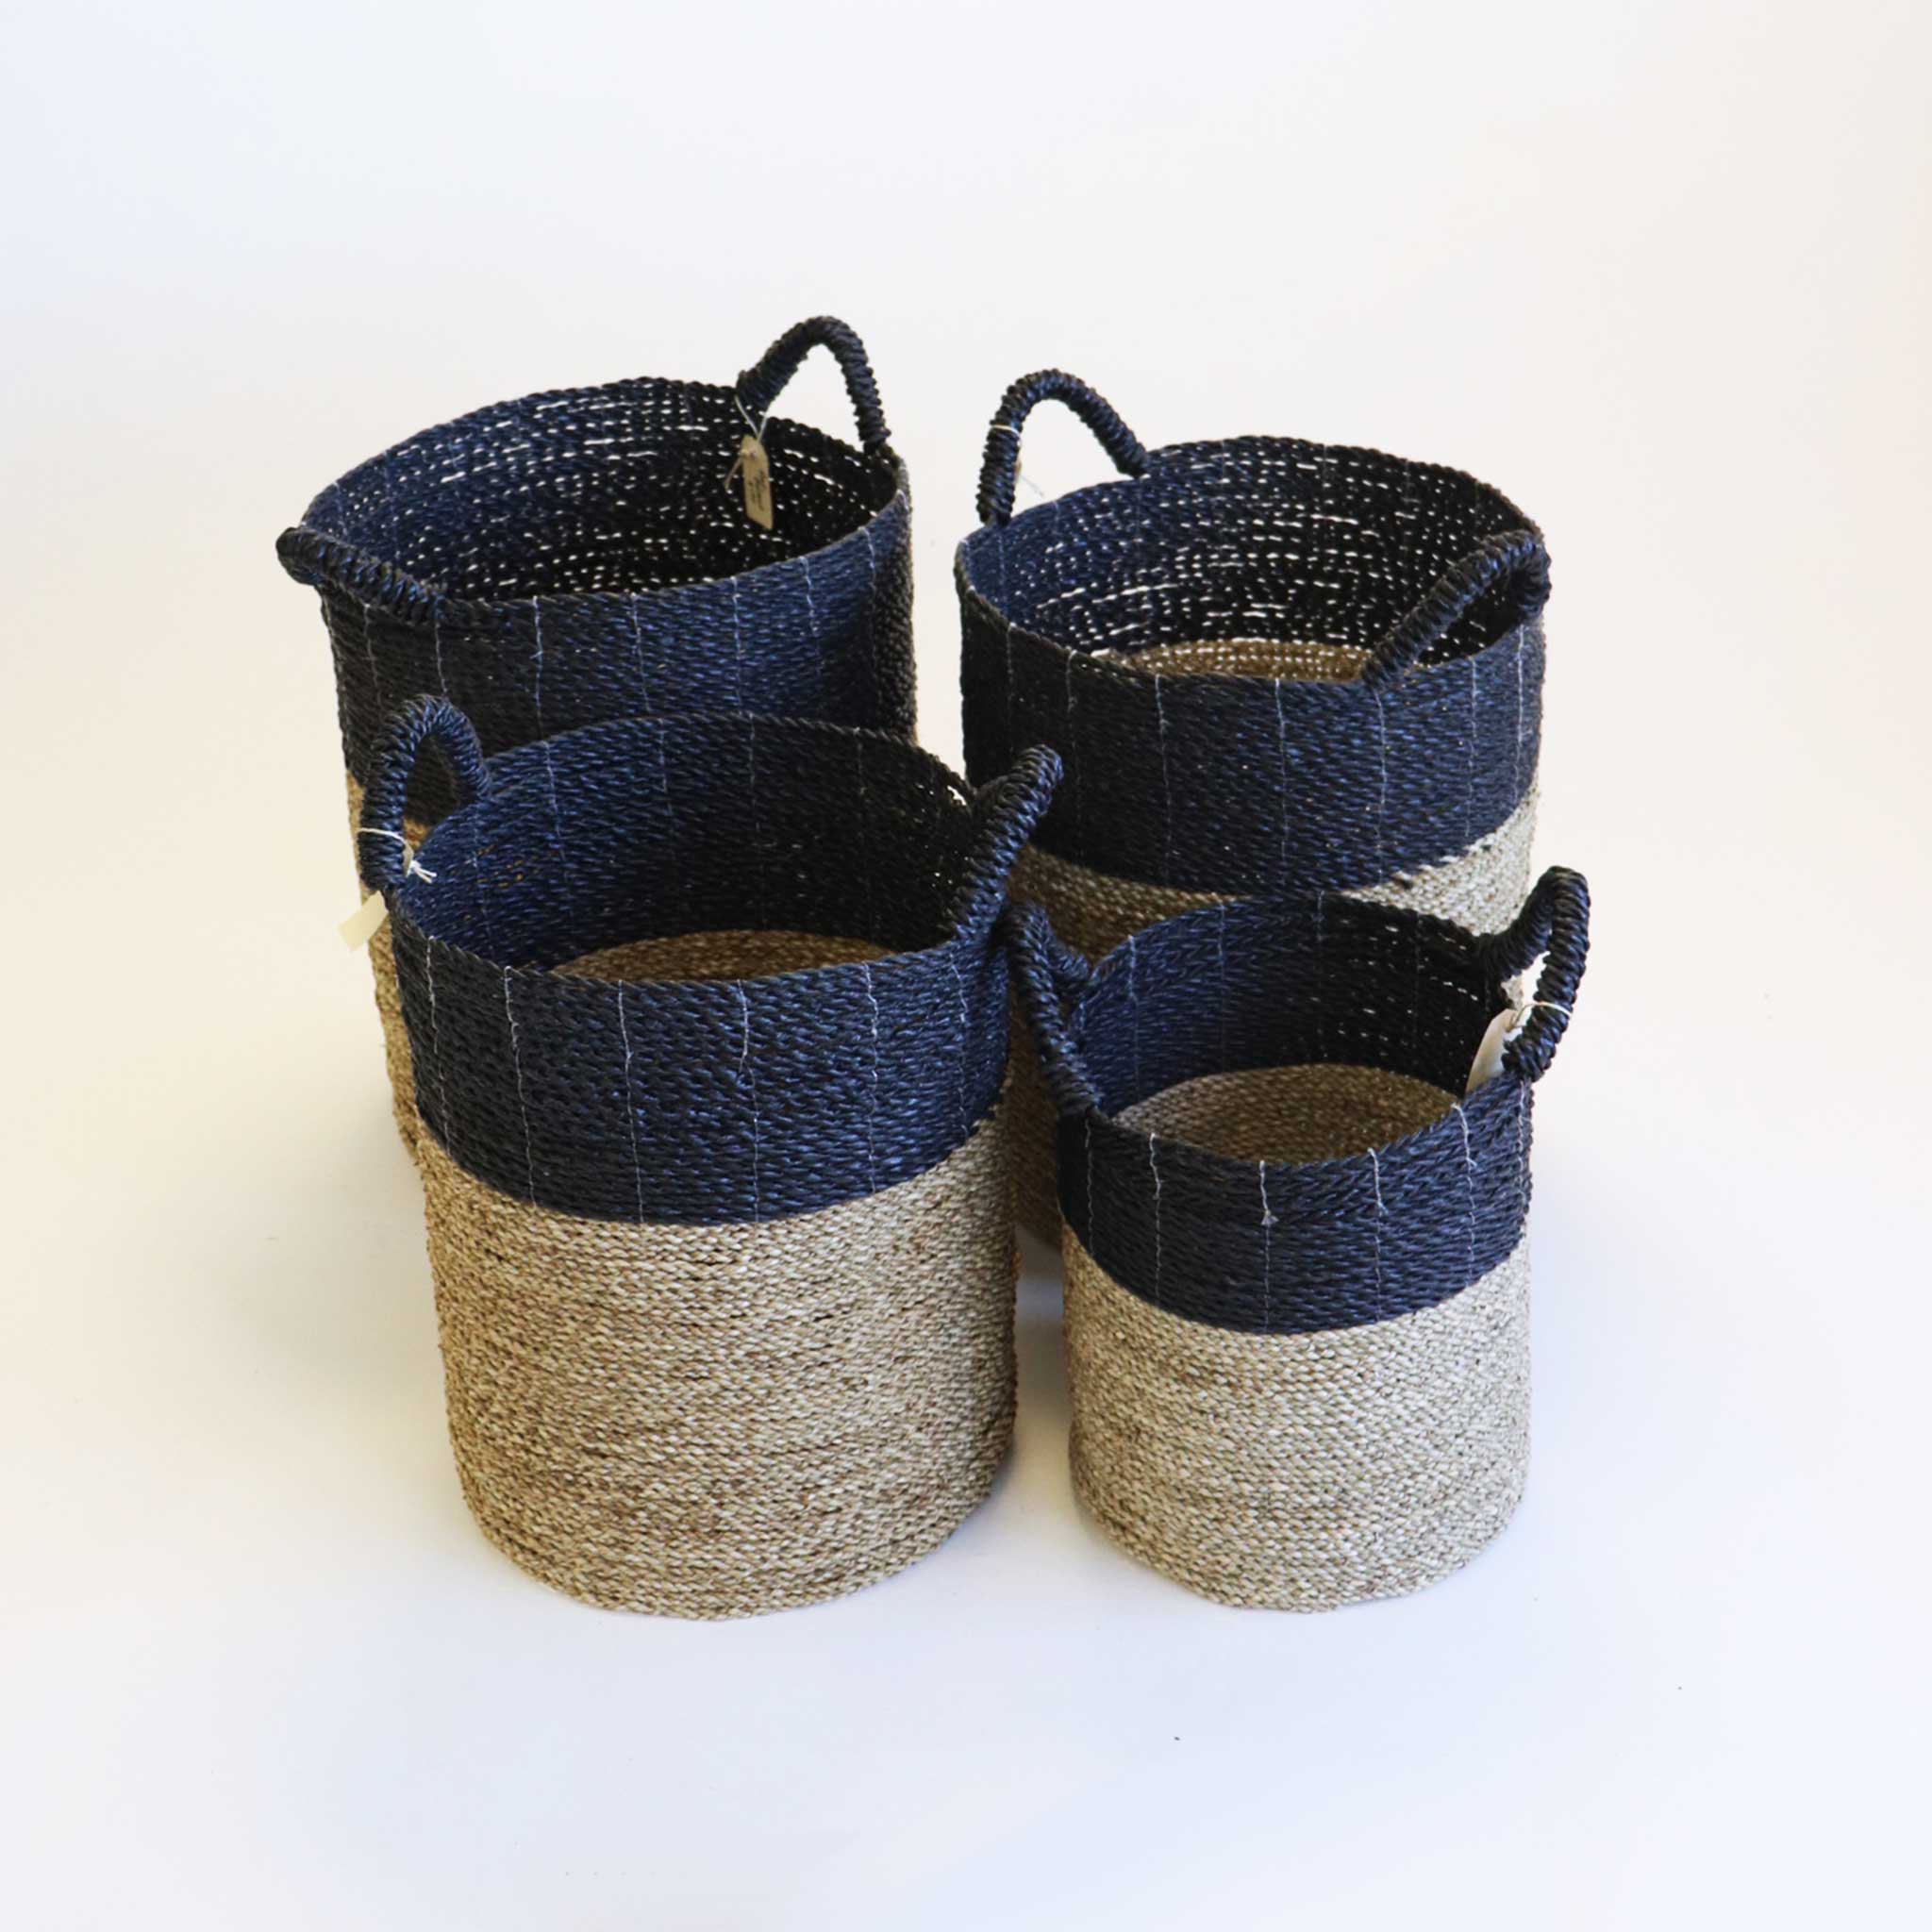 Black and Natural Woven Baskets